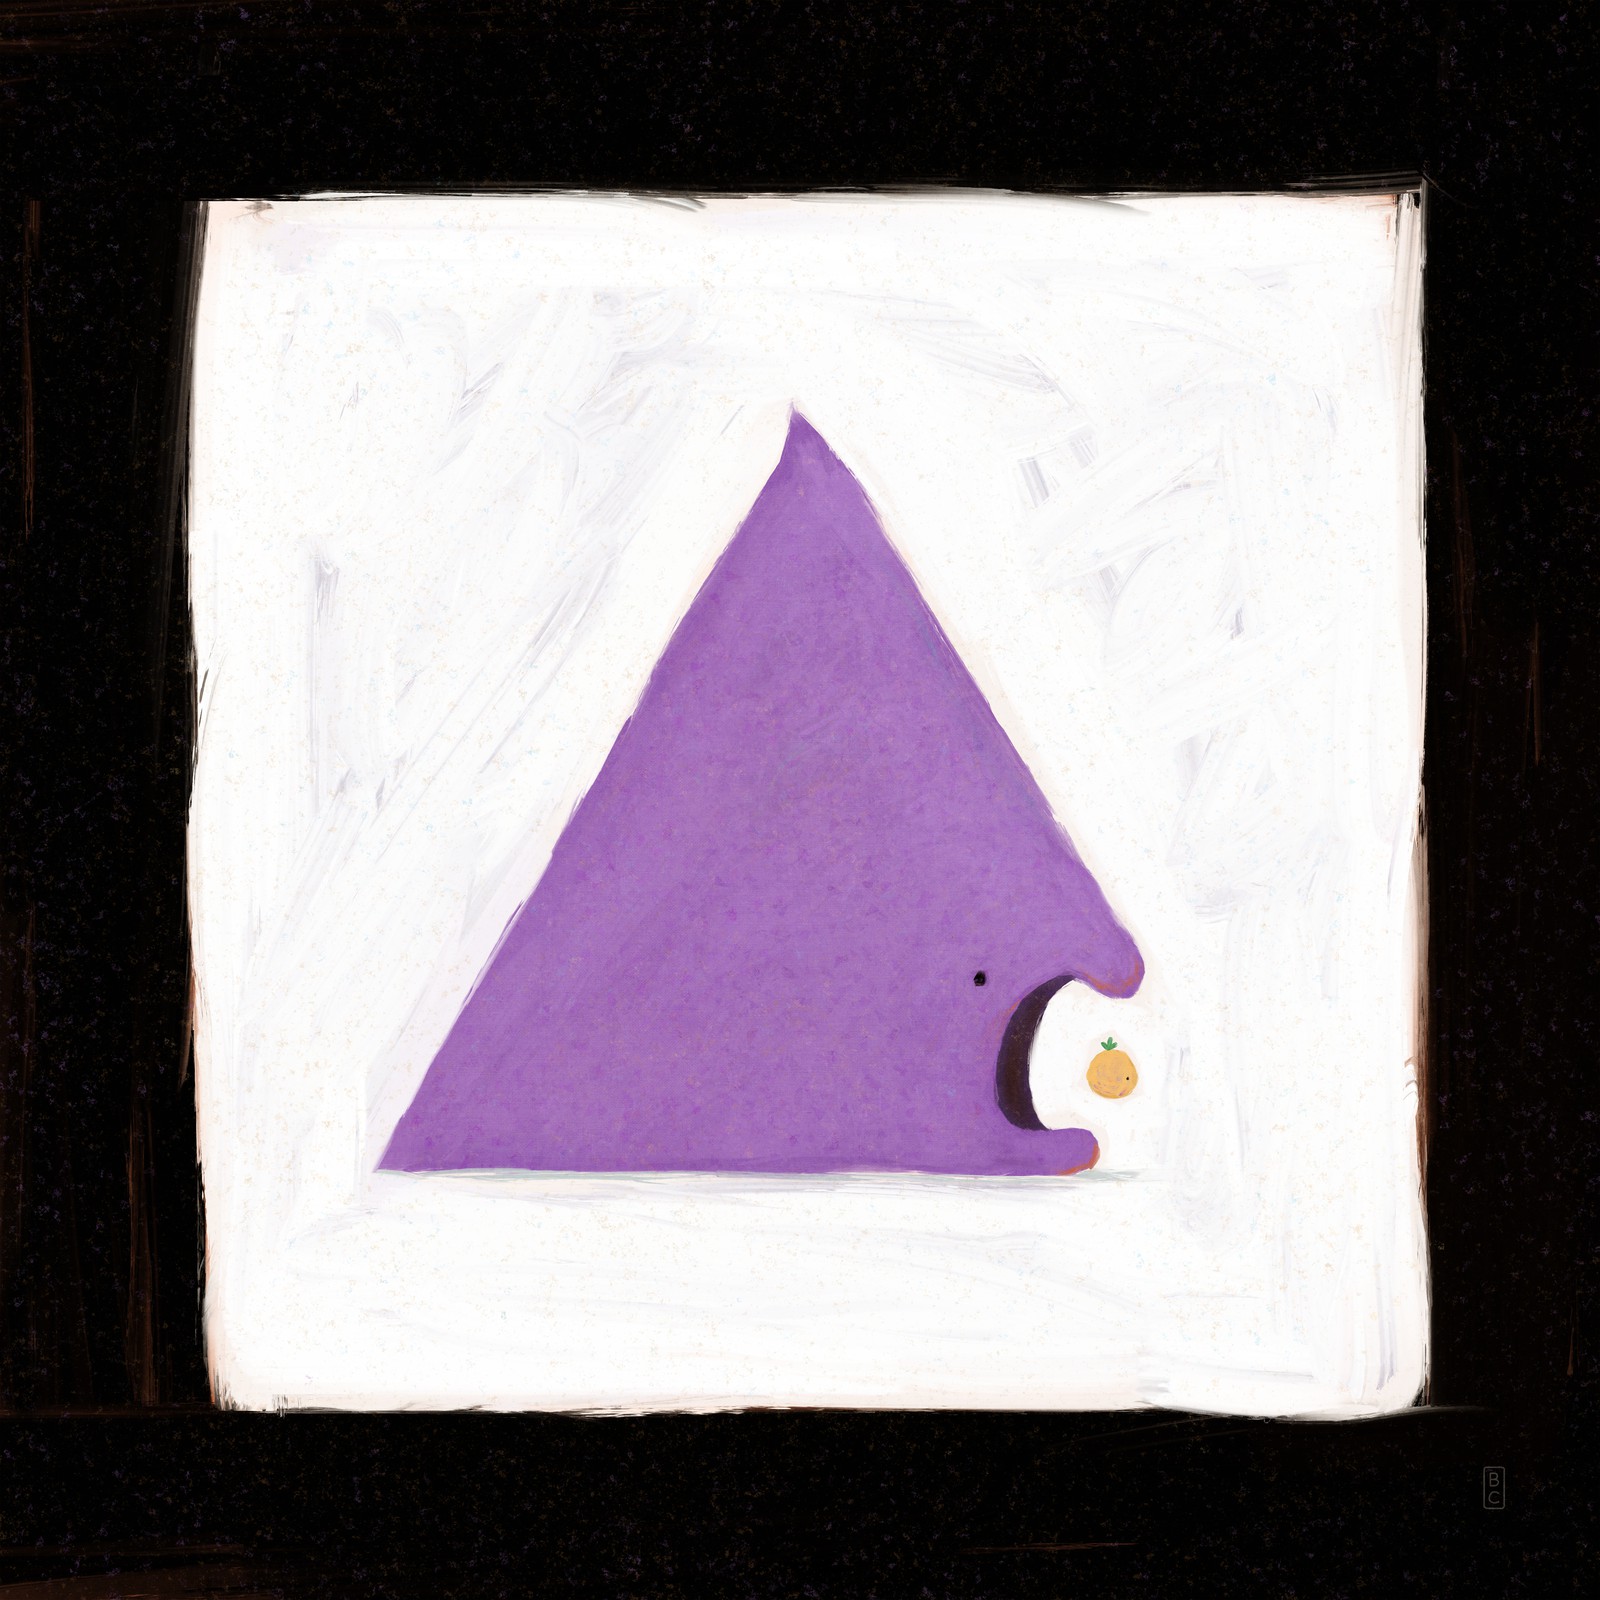 A large purple triangle with its mouth open ready to eat a small orange creature.